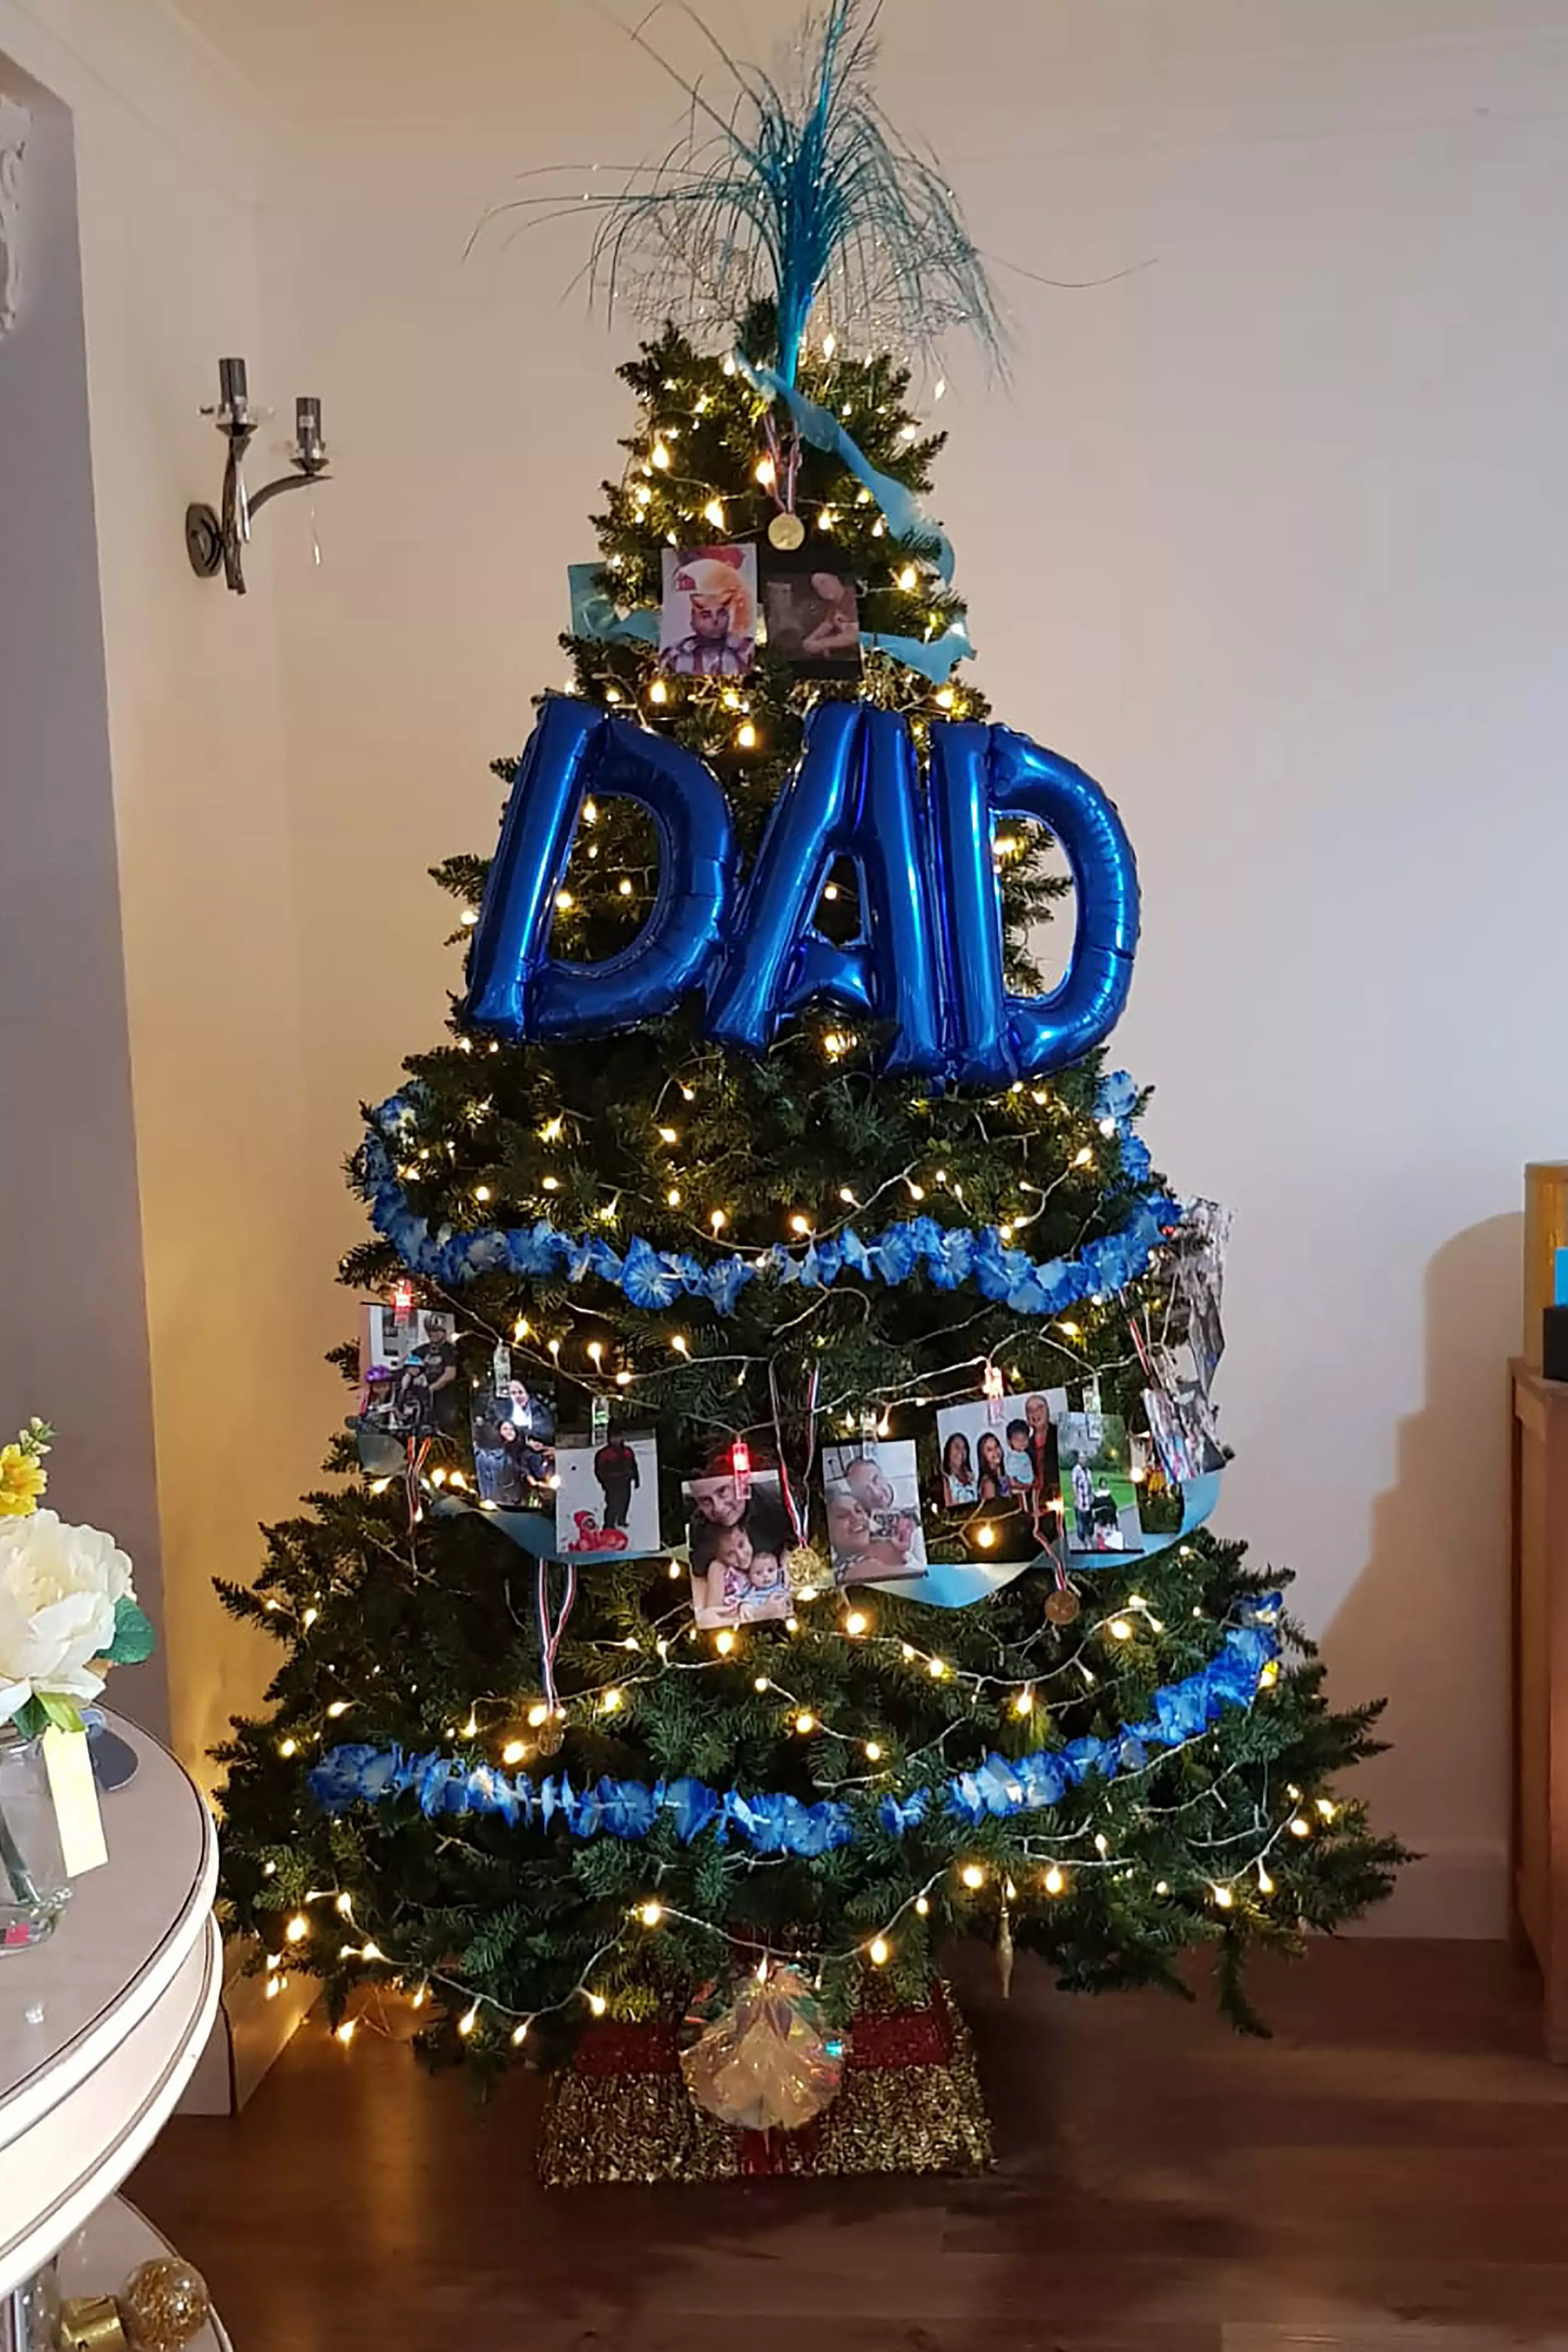 Or how about a Father's Day tree? (